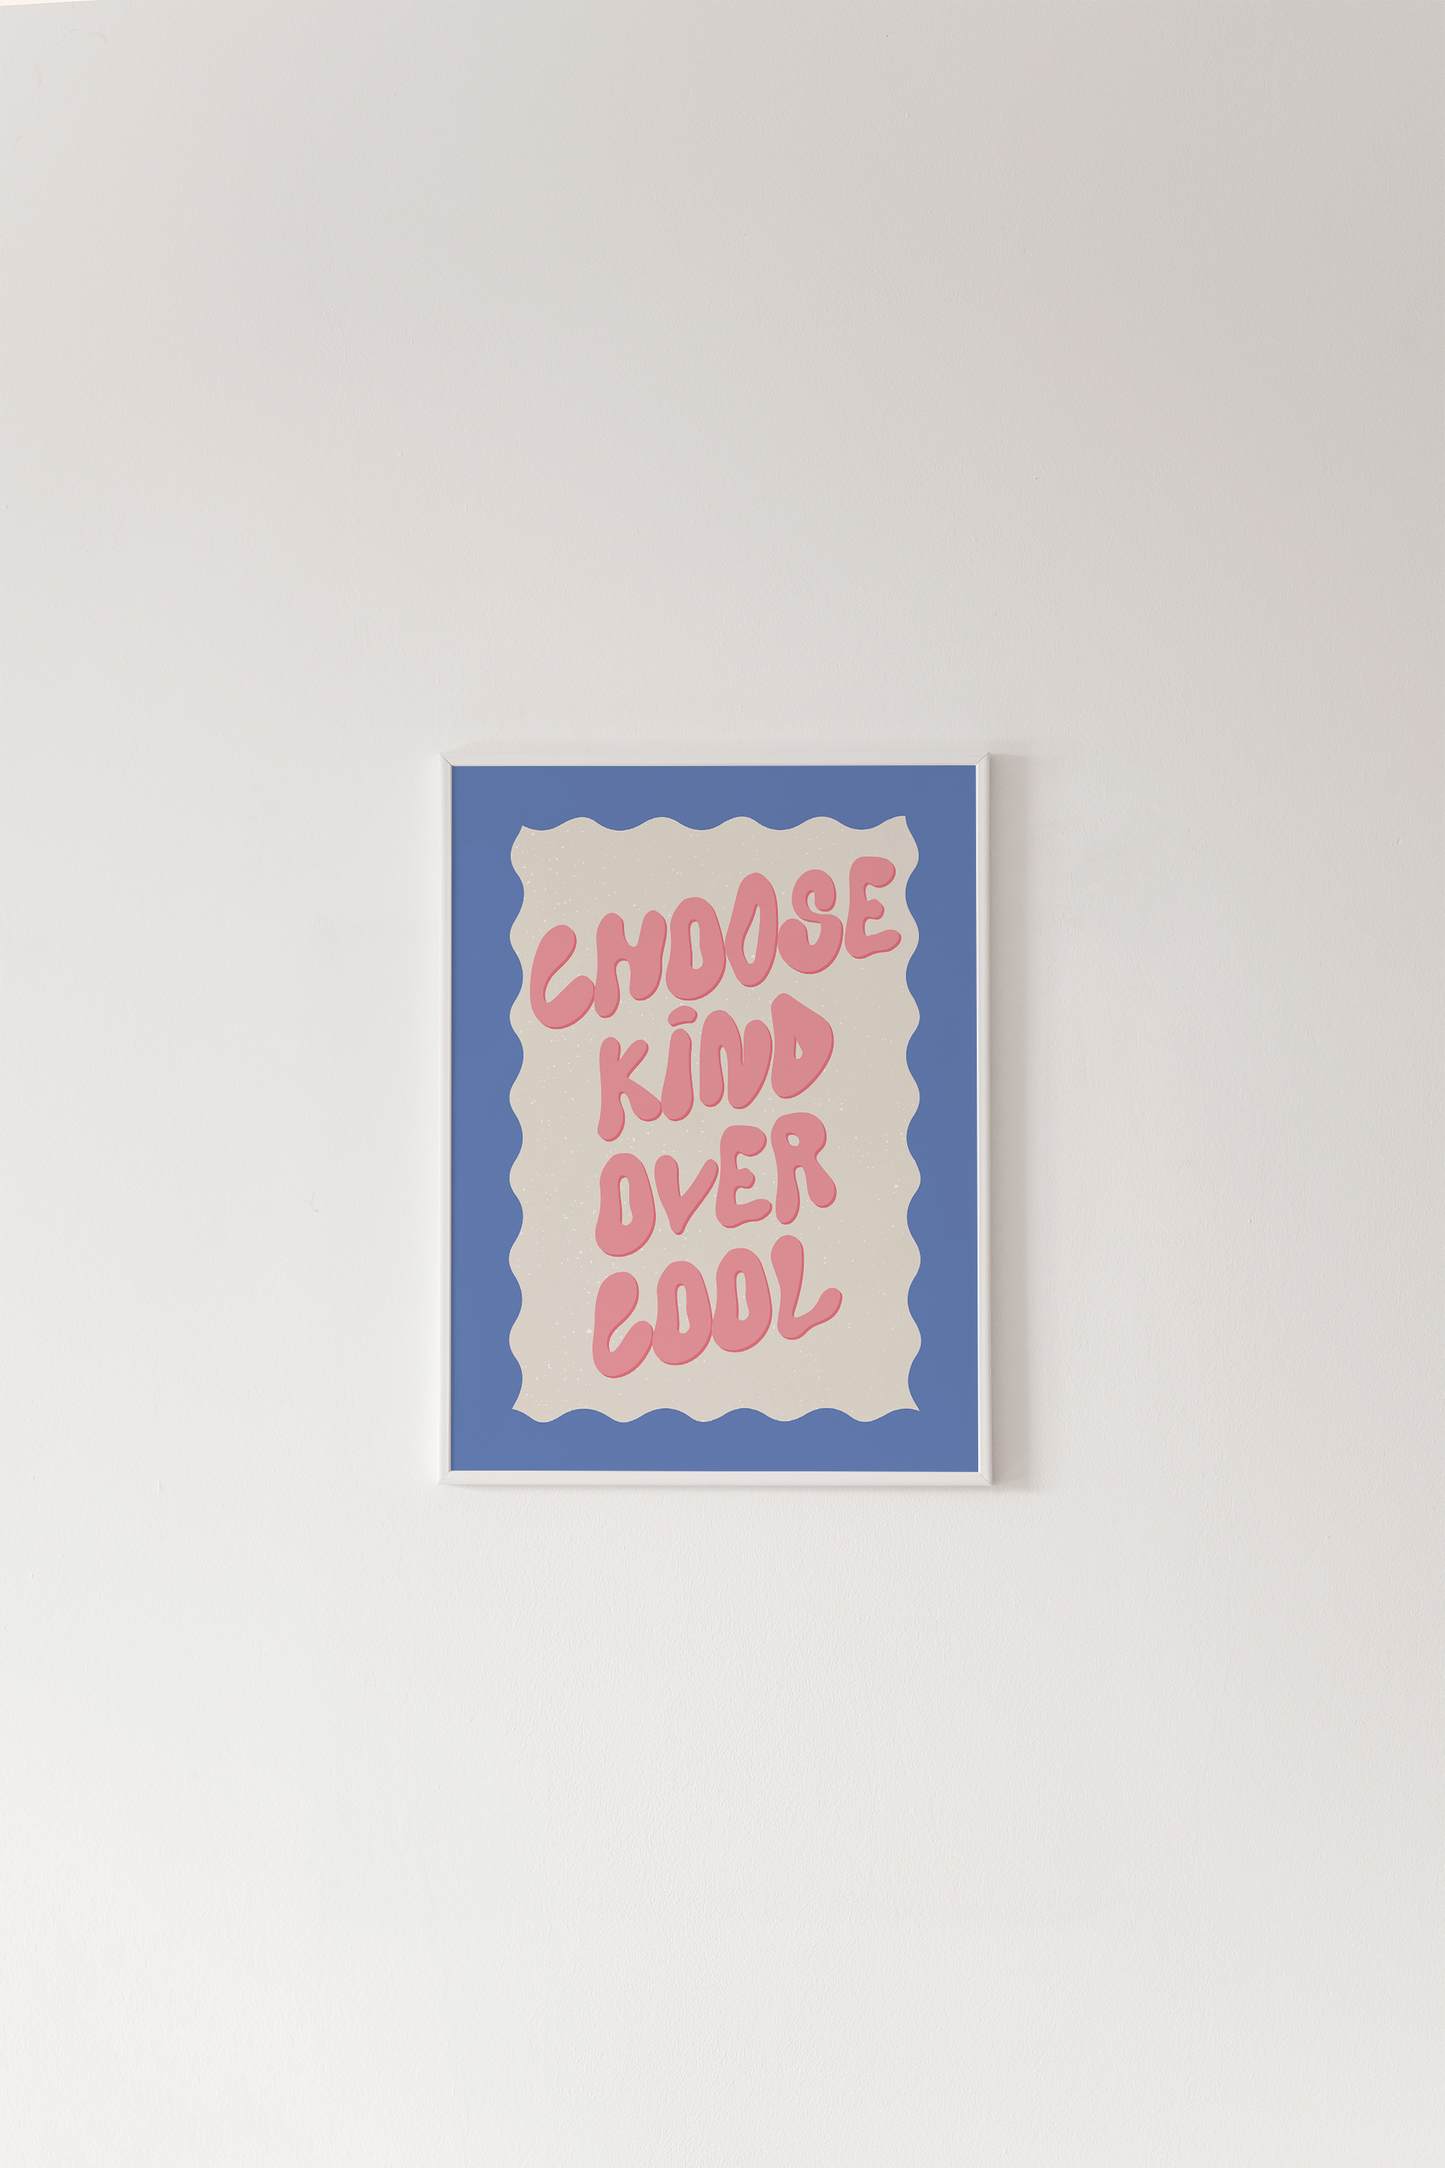 Special Price Choose Kind Over Cool Print